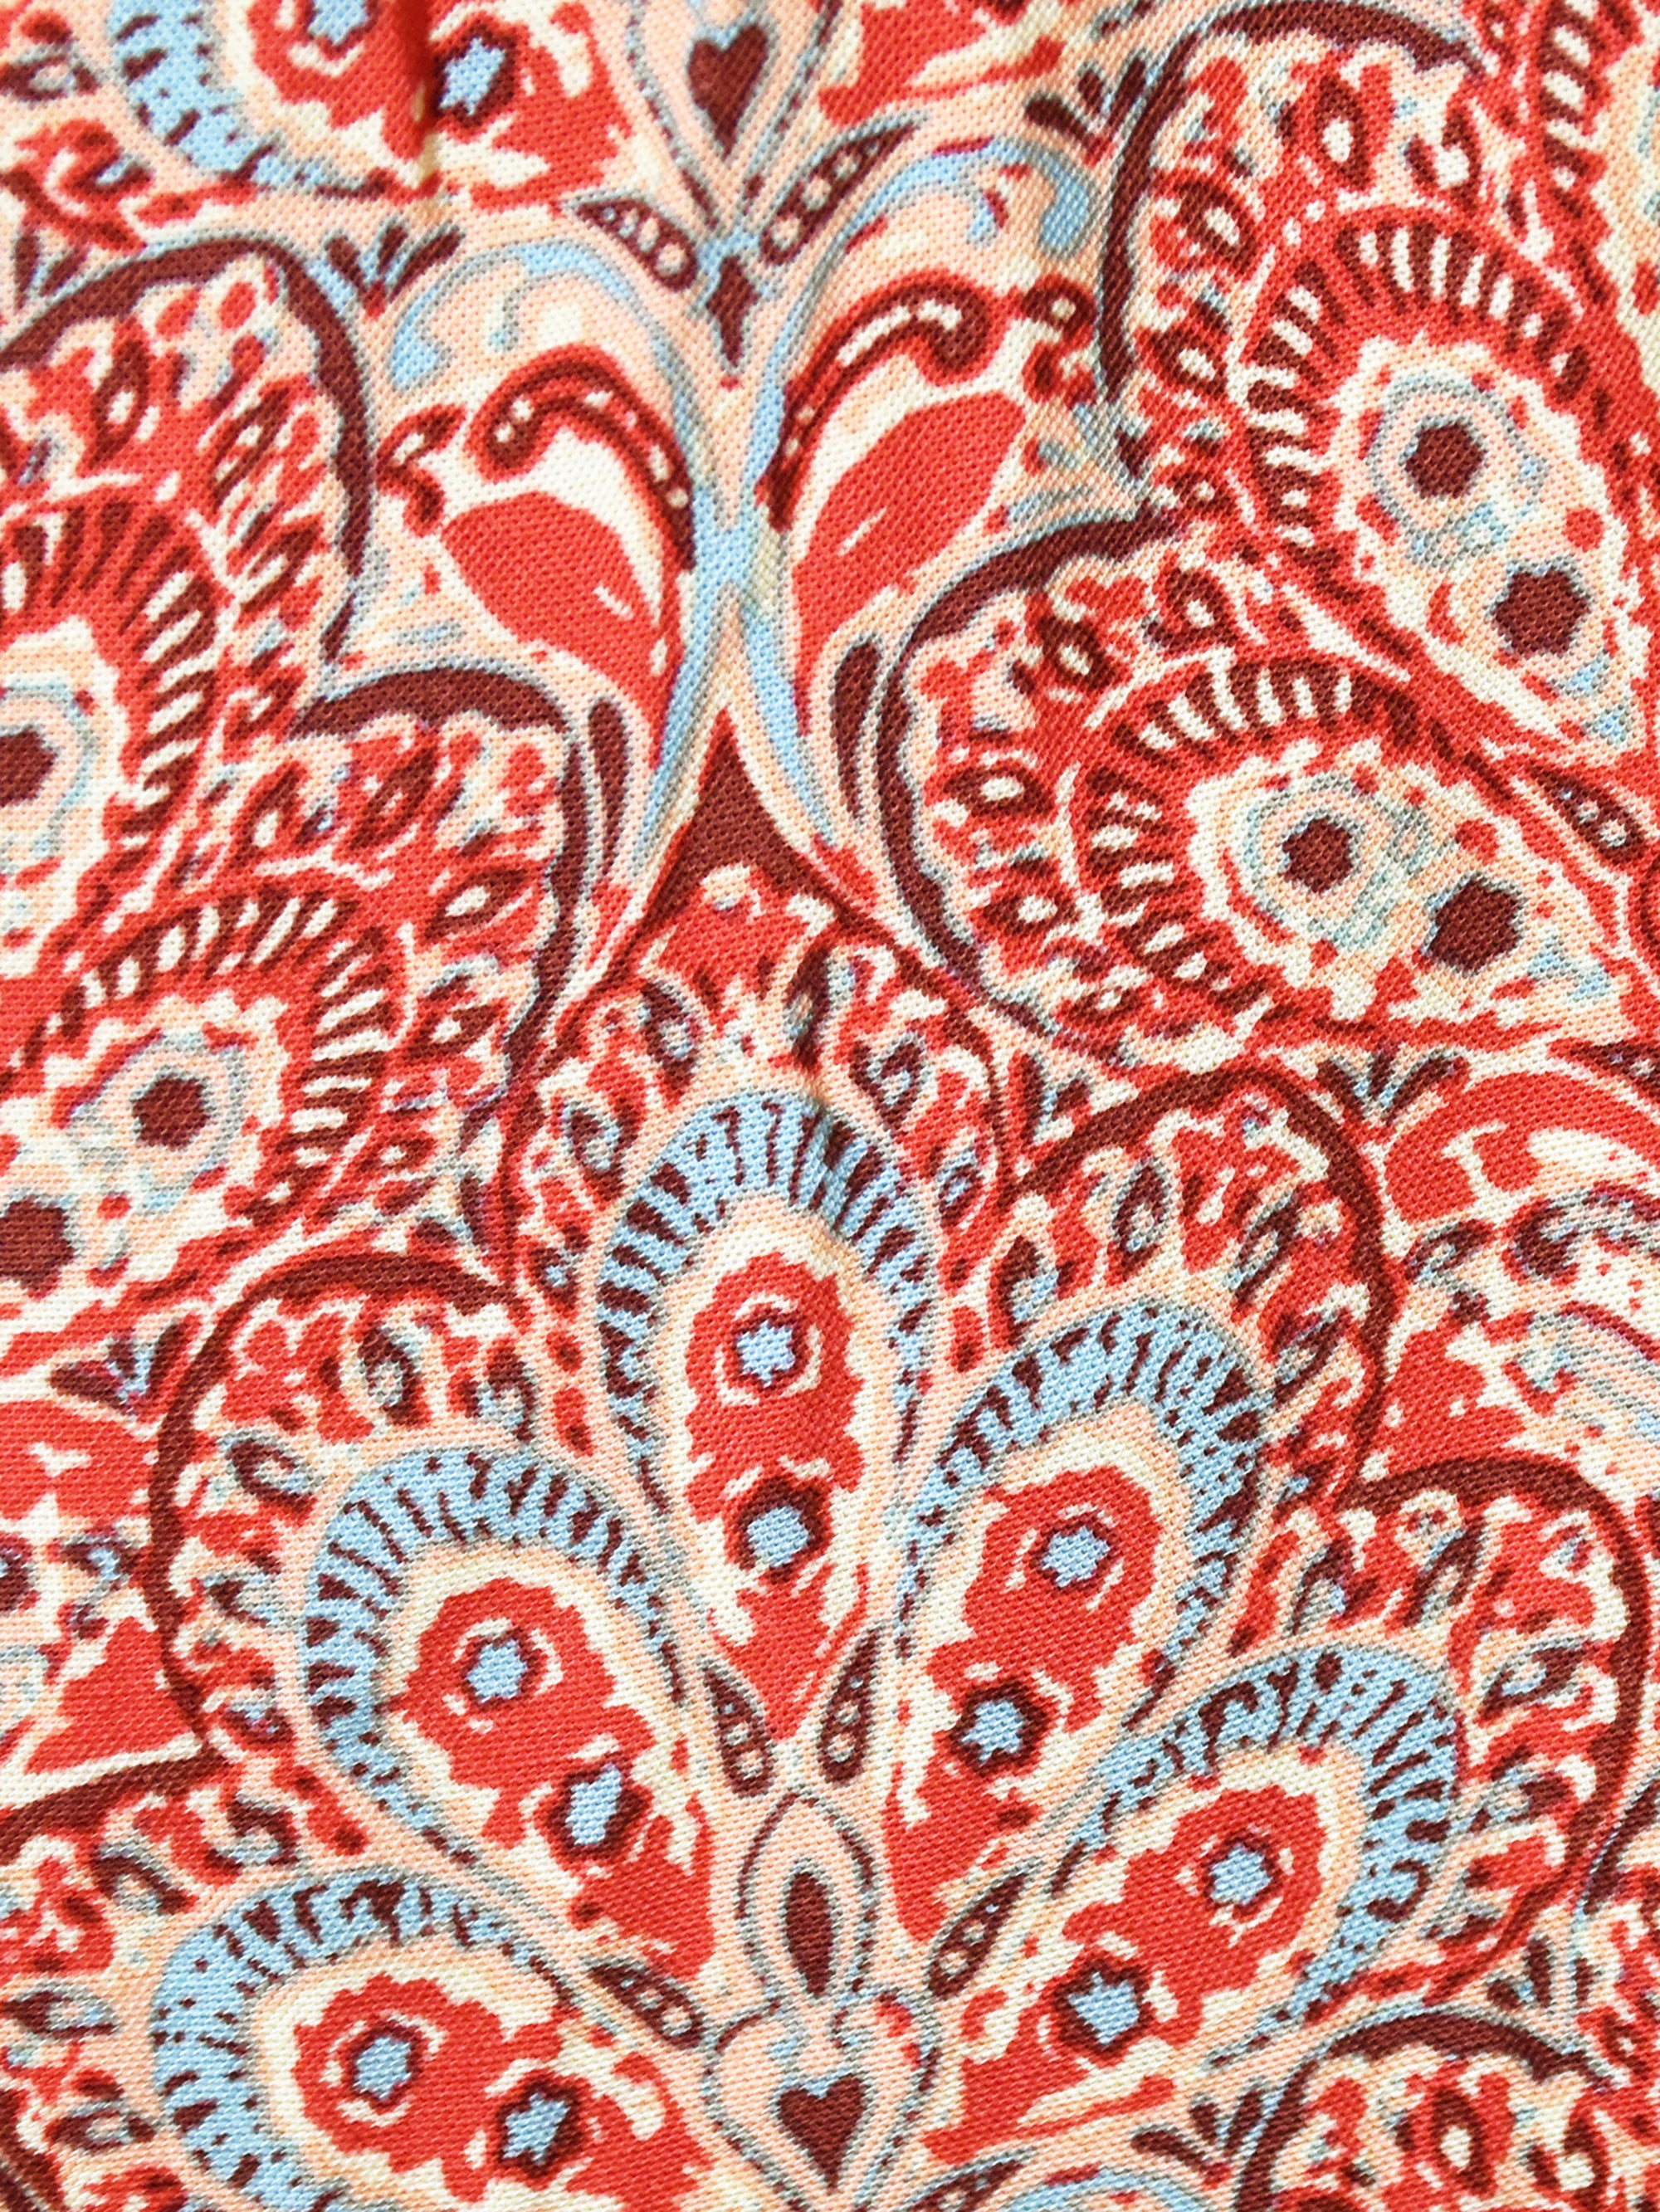 Red Paisley Print Shirred Neck Blouse